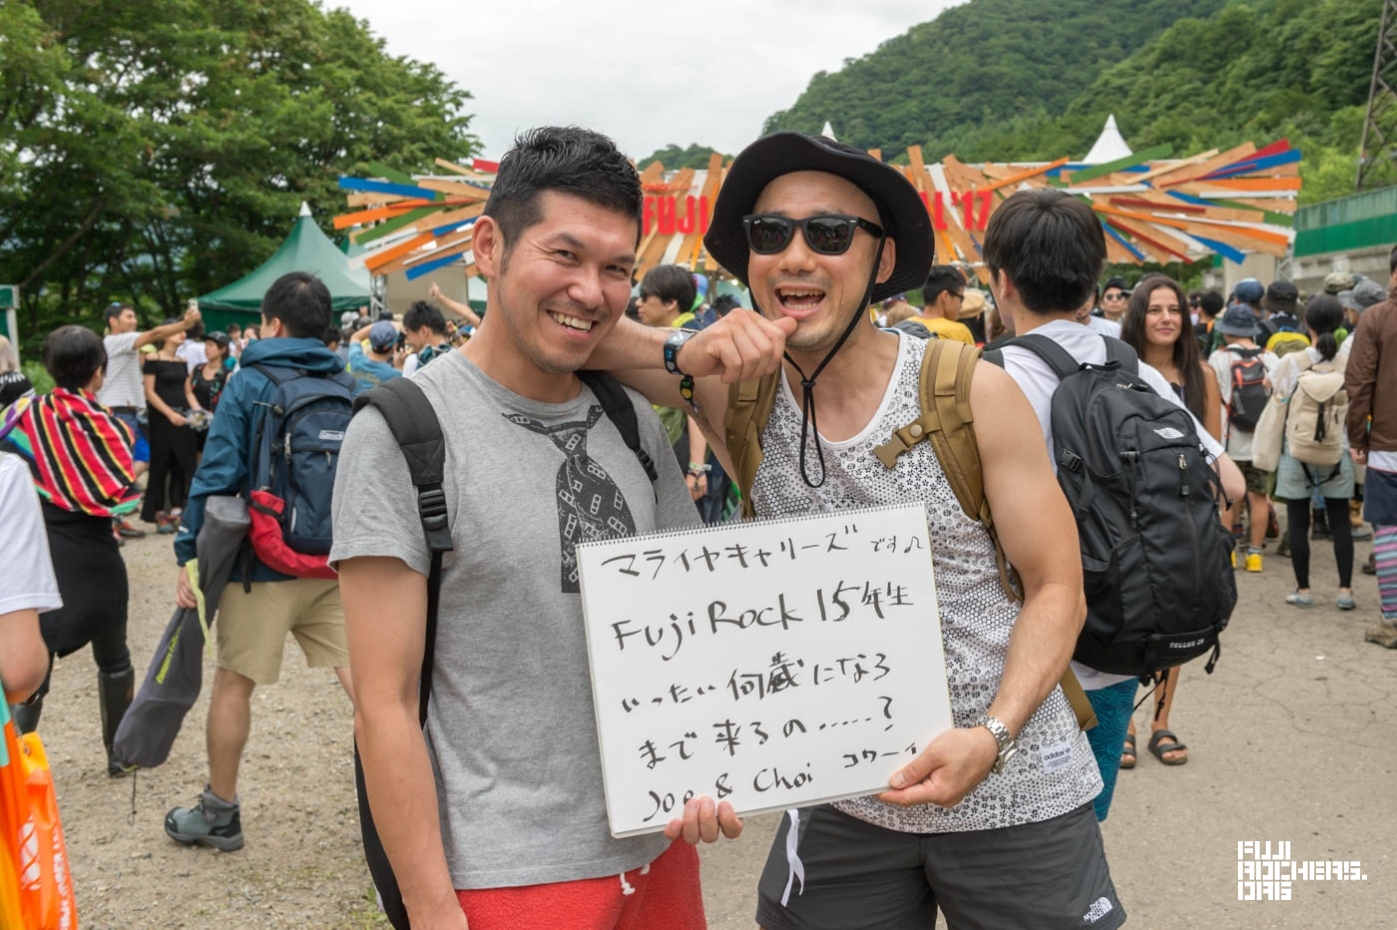 Message for Fujirock #34